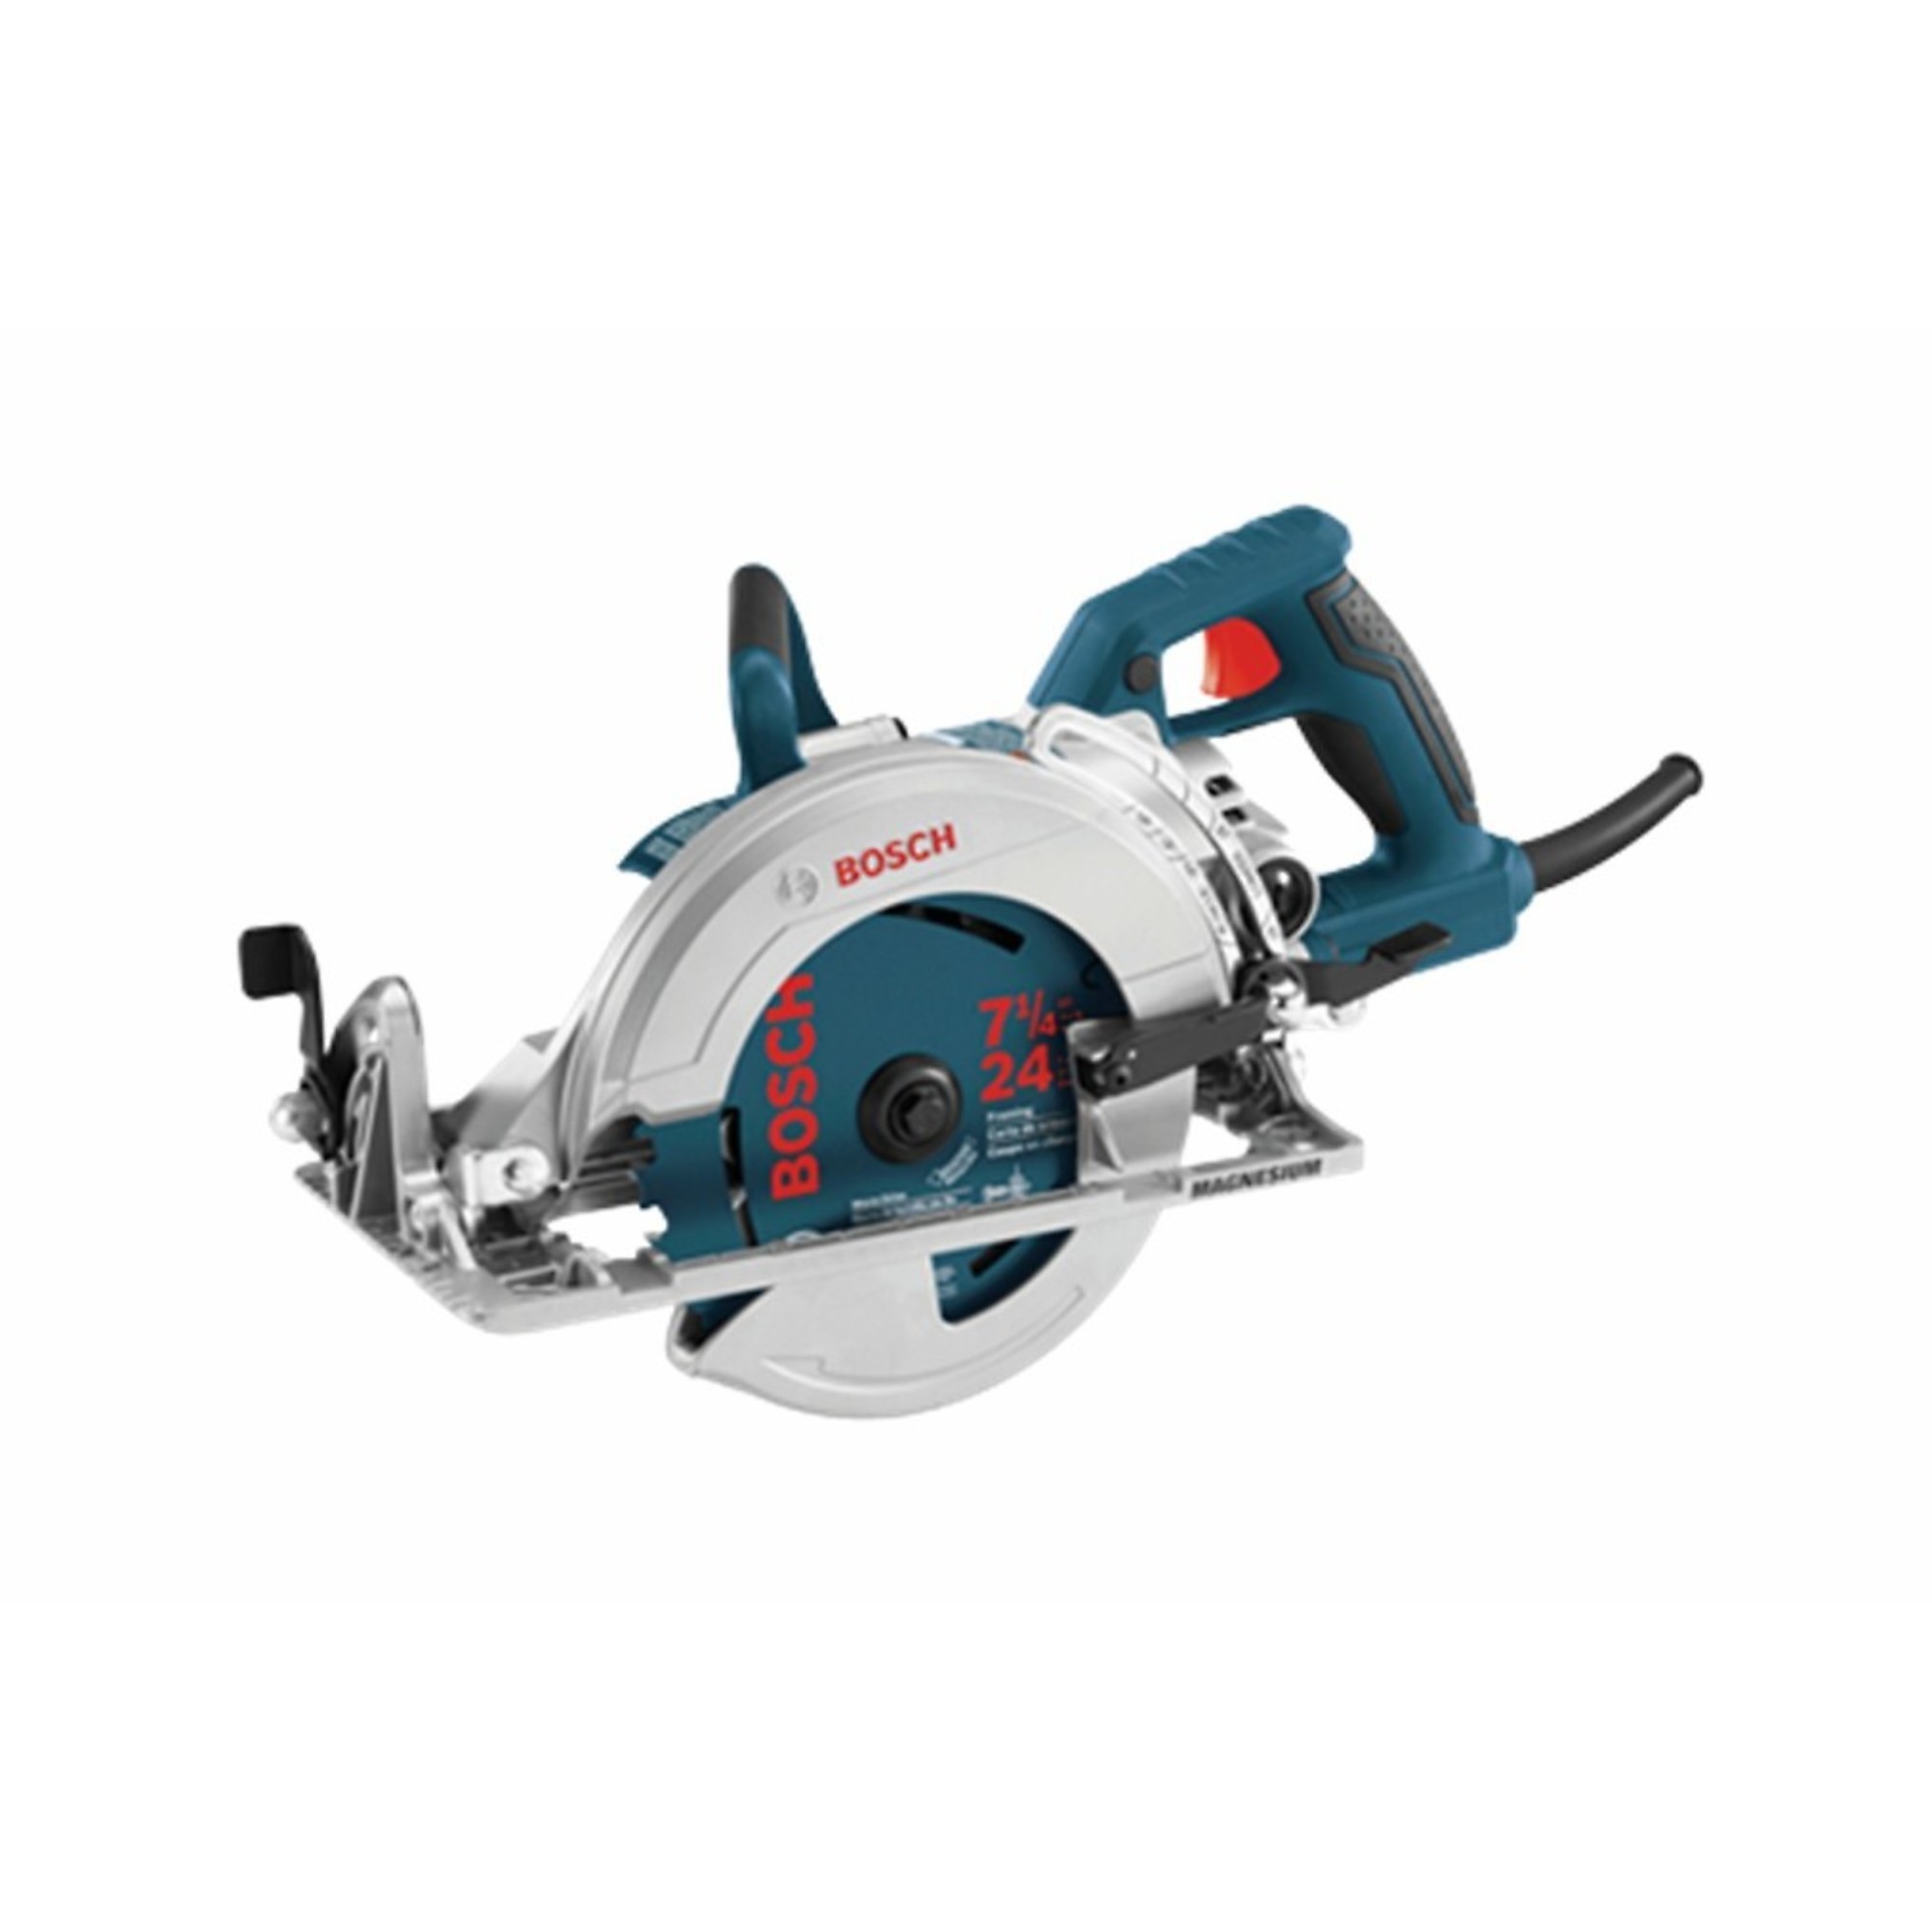 Bosch, 7-1/4Inch Blade Left Worm Drive Saw, Blade Diameter 7 in, Amps 15, Volts 120, Model CSW41